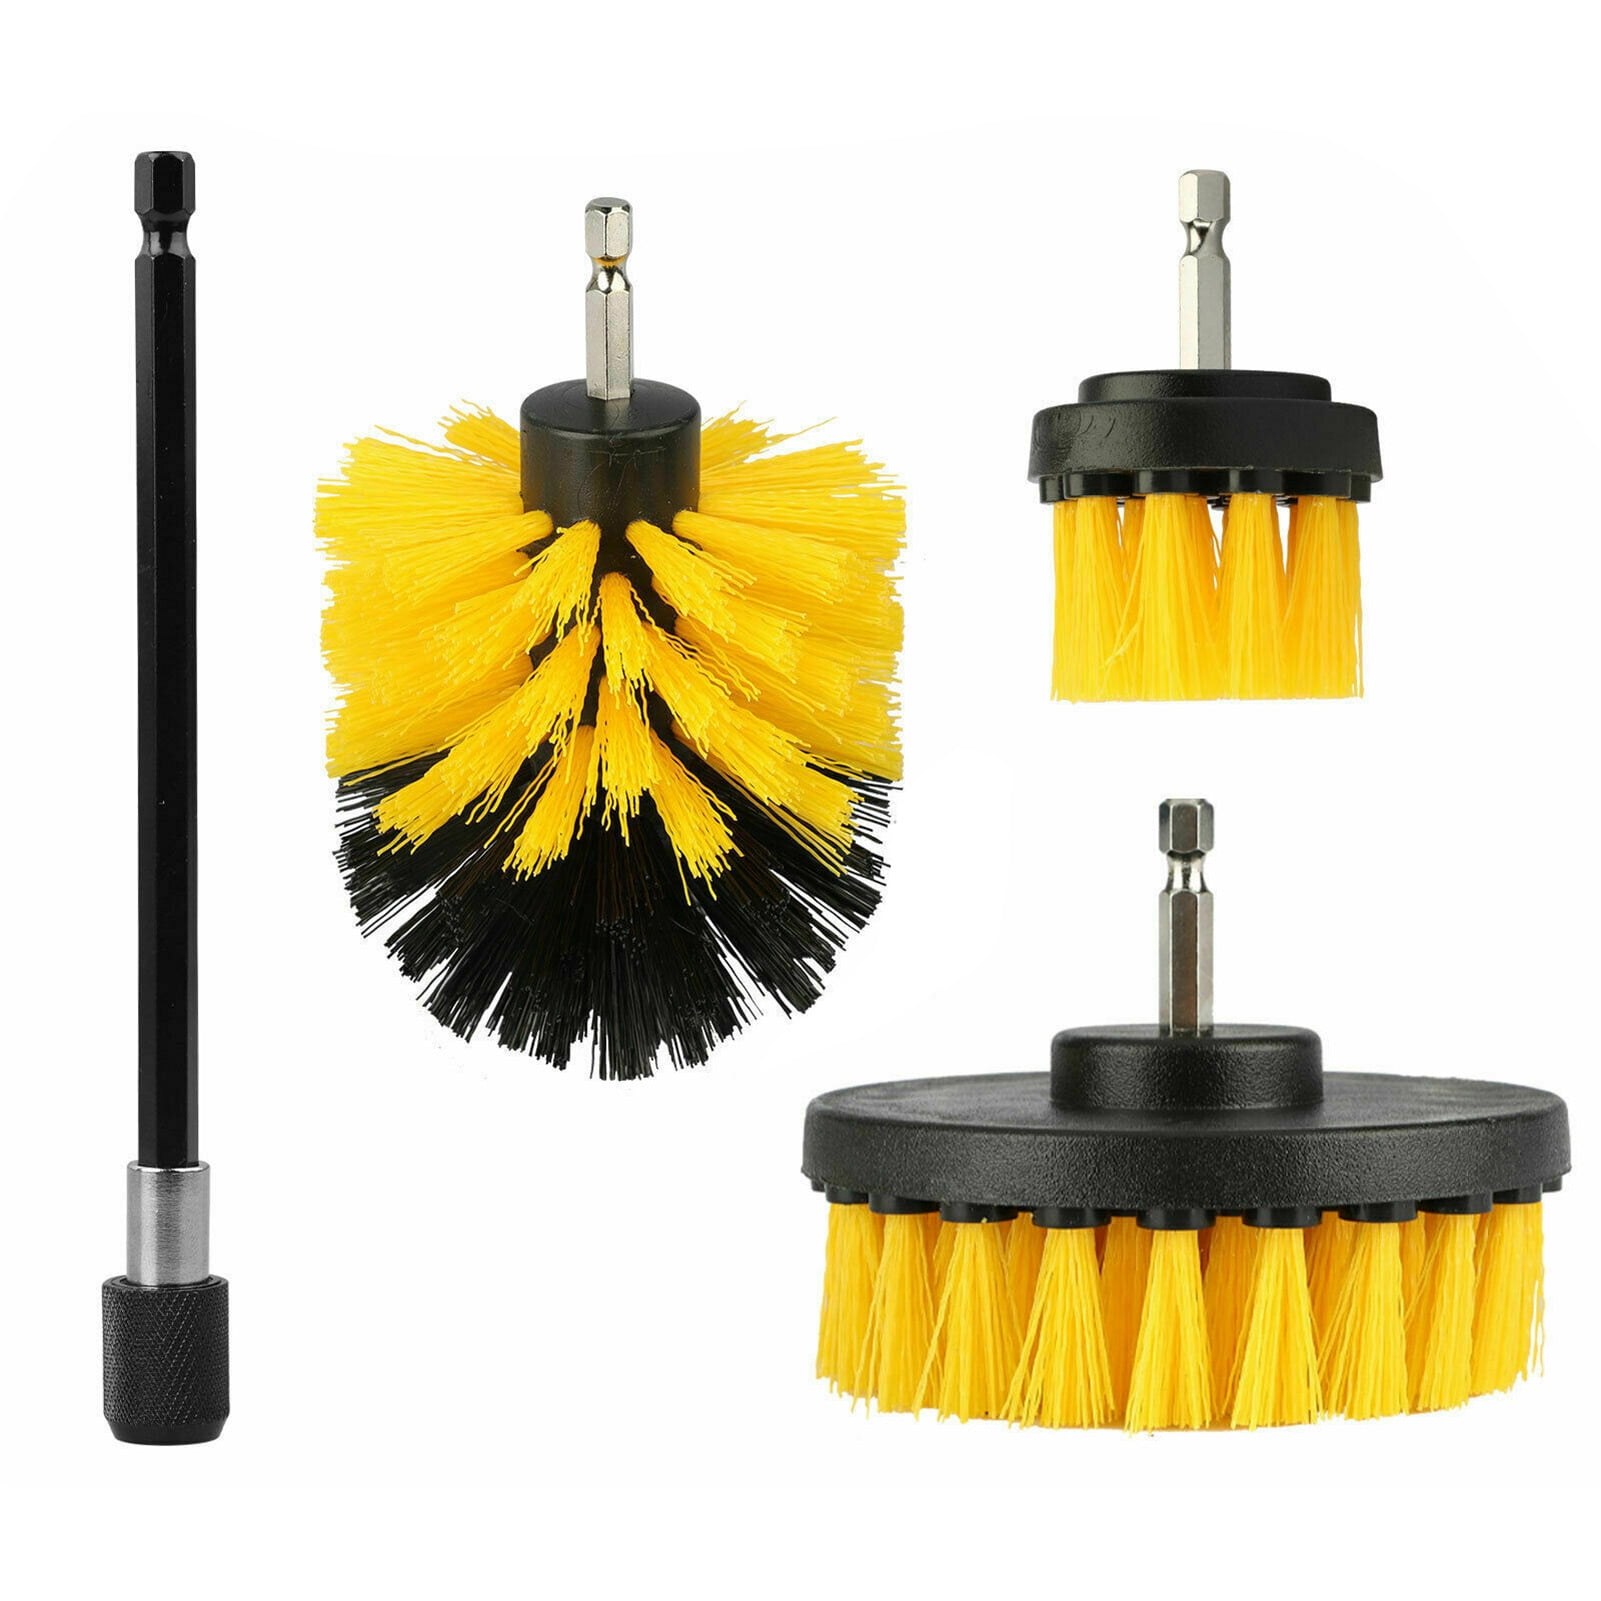 Car Wash Brush in Bangalore at best price by Sgt Multiclean